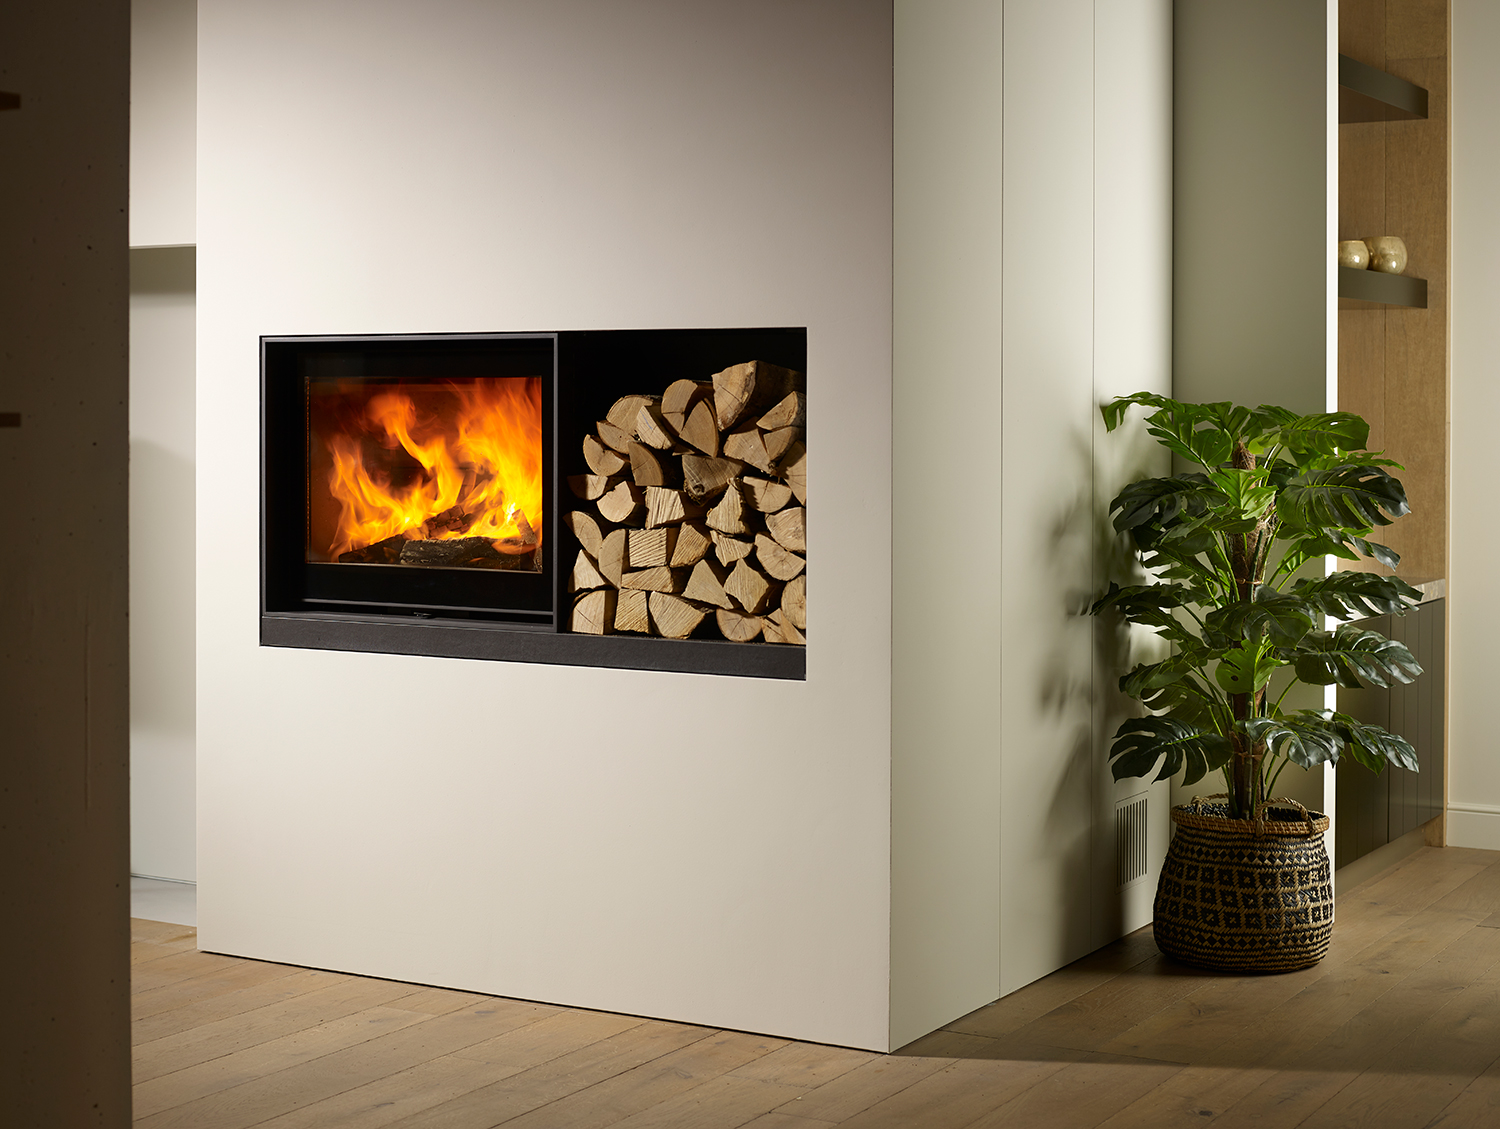 Photo Built-in and inserts woodfireplaces